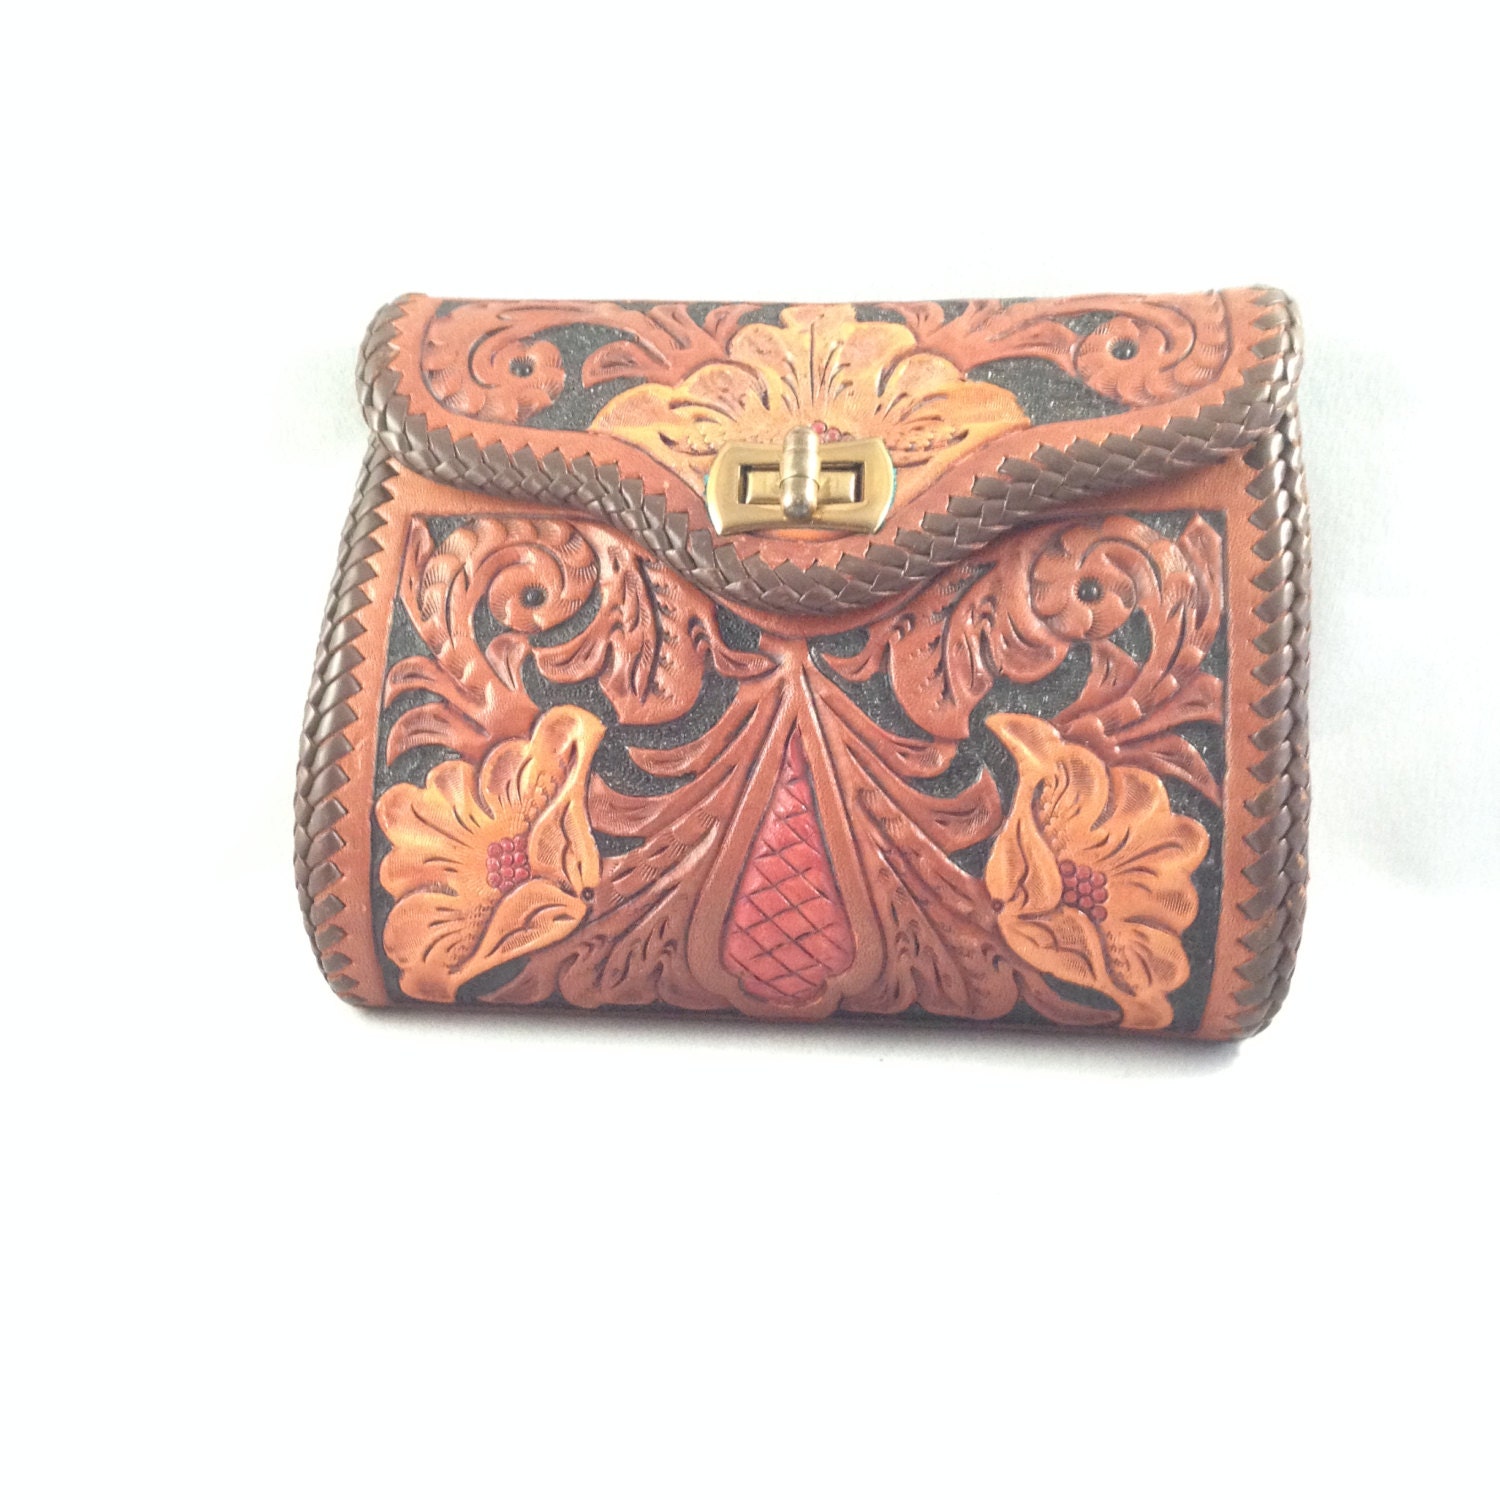 Hand Tooled Leather Clutch Purse Floral Design